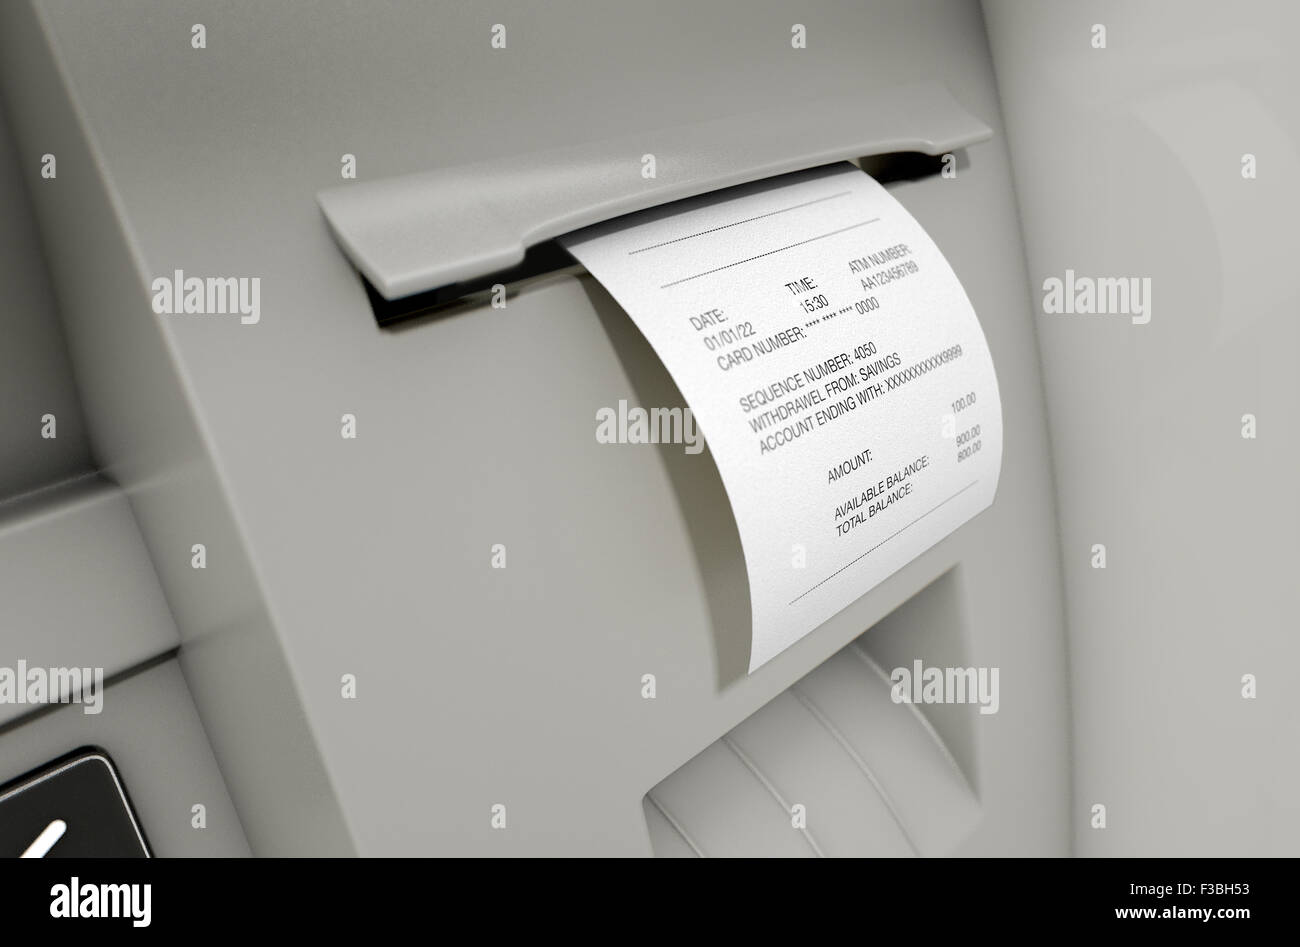 A closeup view of the slip printing section of an atm with a withdrawel receipt Stock Photo